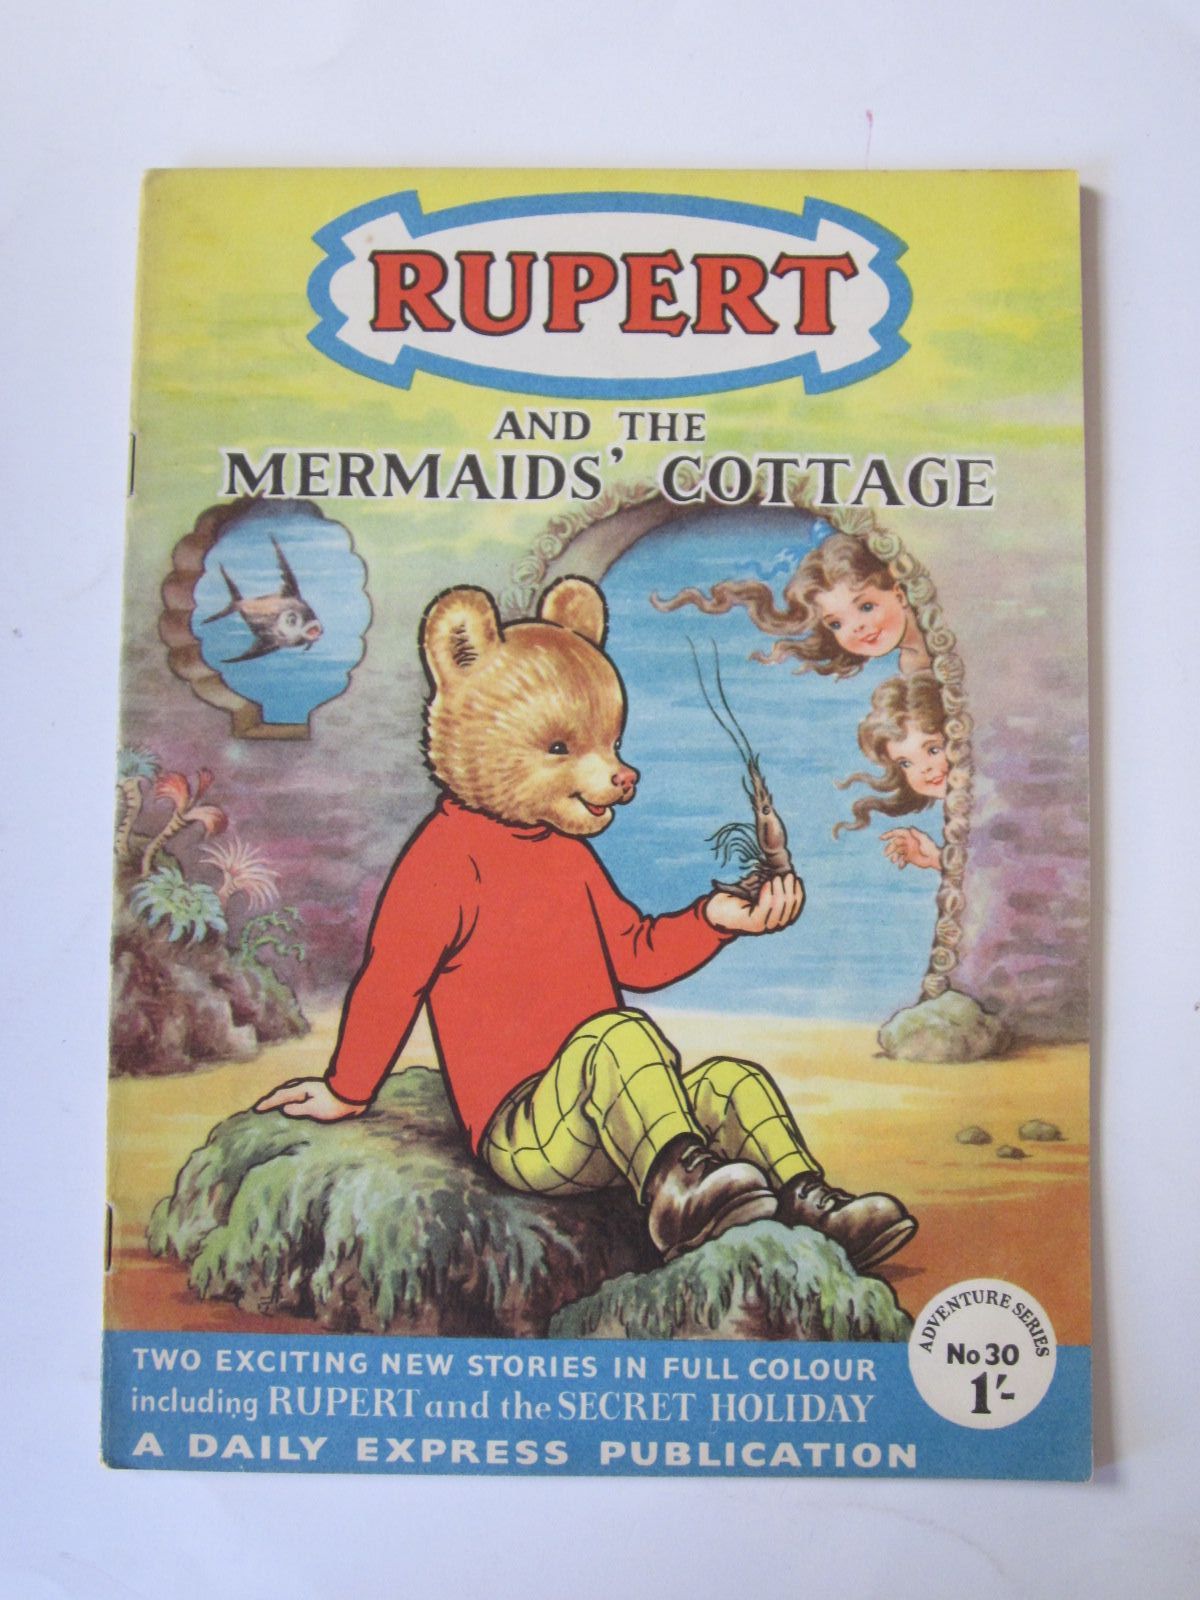 Photo of RUPERT ADVENTURE SERIES No. 30 - RUPERT AND THE MERMAIDS' COTTAGE written by Bestall, Alfred published by Daily Express (STOCK CODE: 1308486)  for sale by Stella & Rose's Books